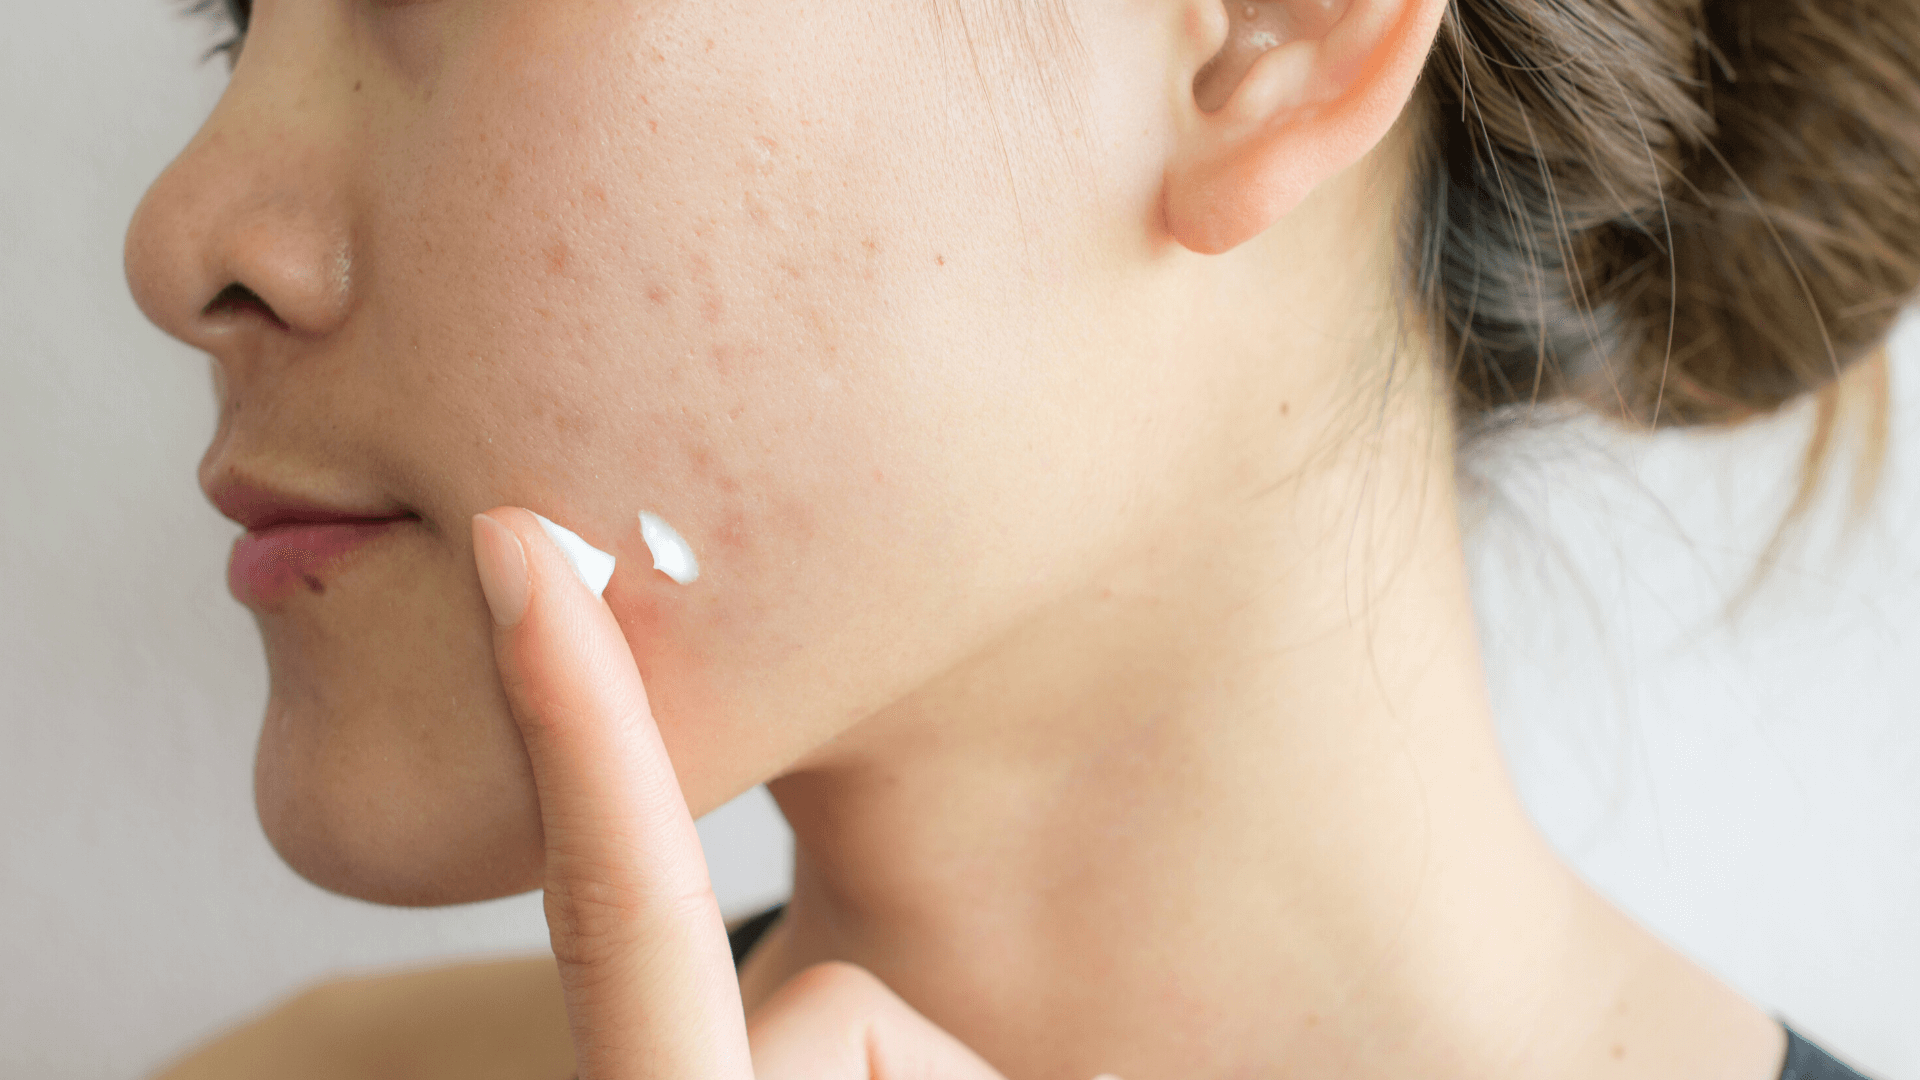 can a food intolerance test help with acne?